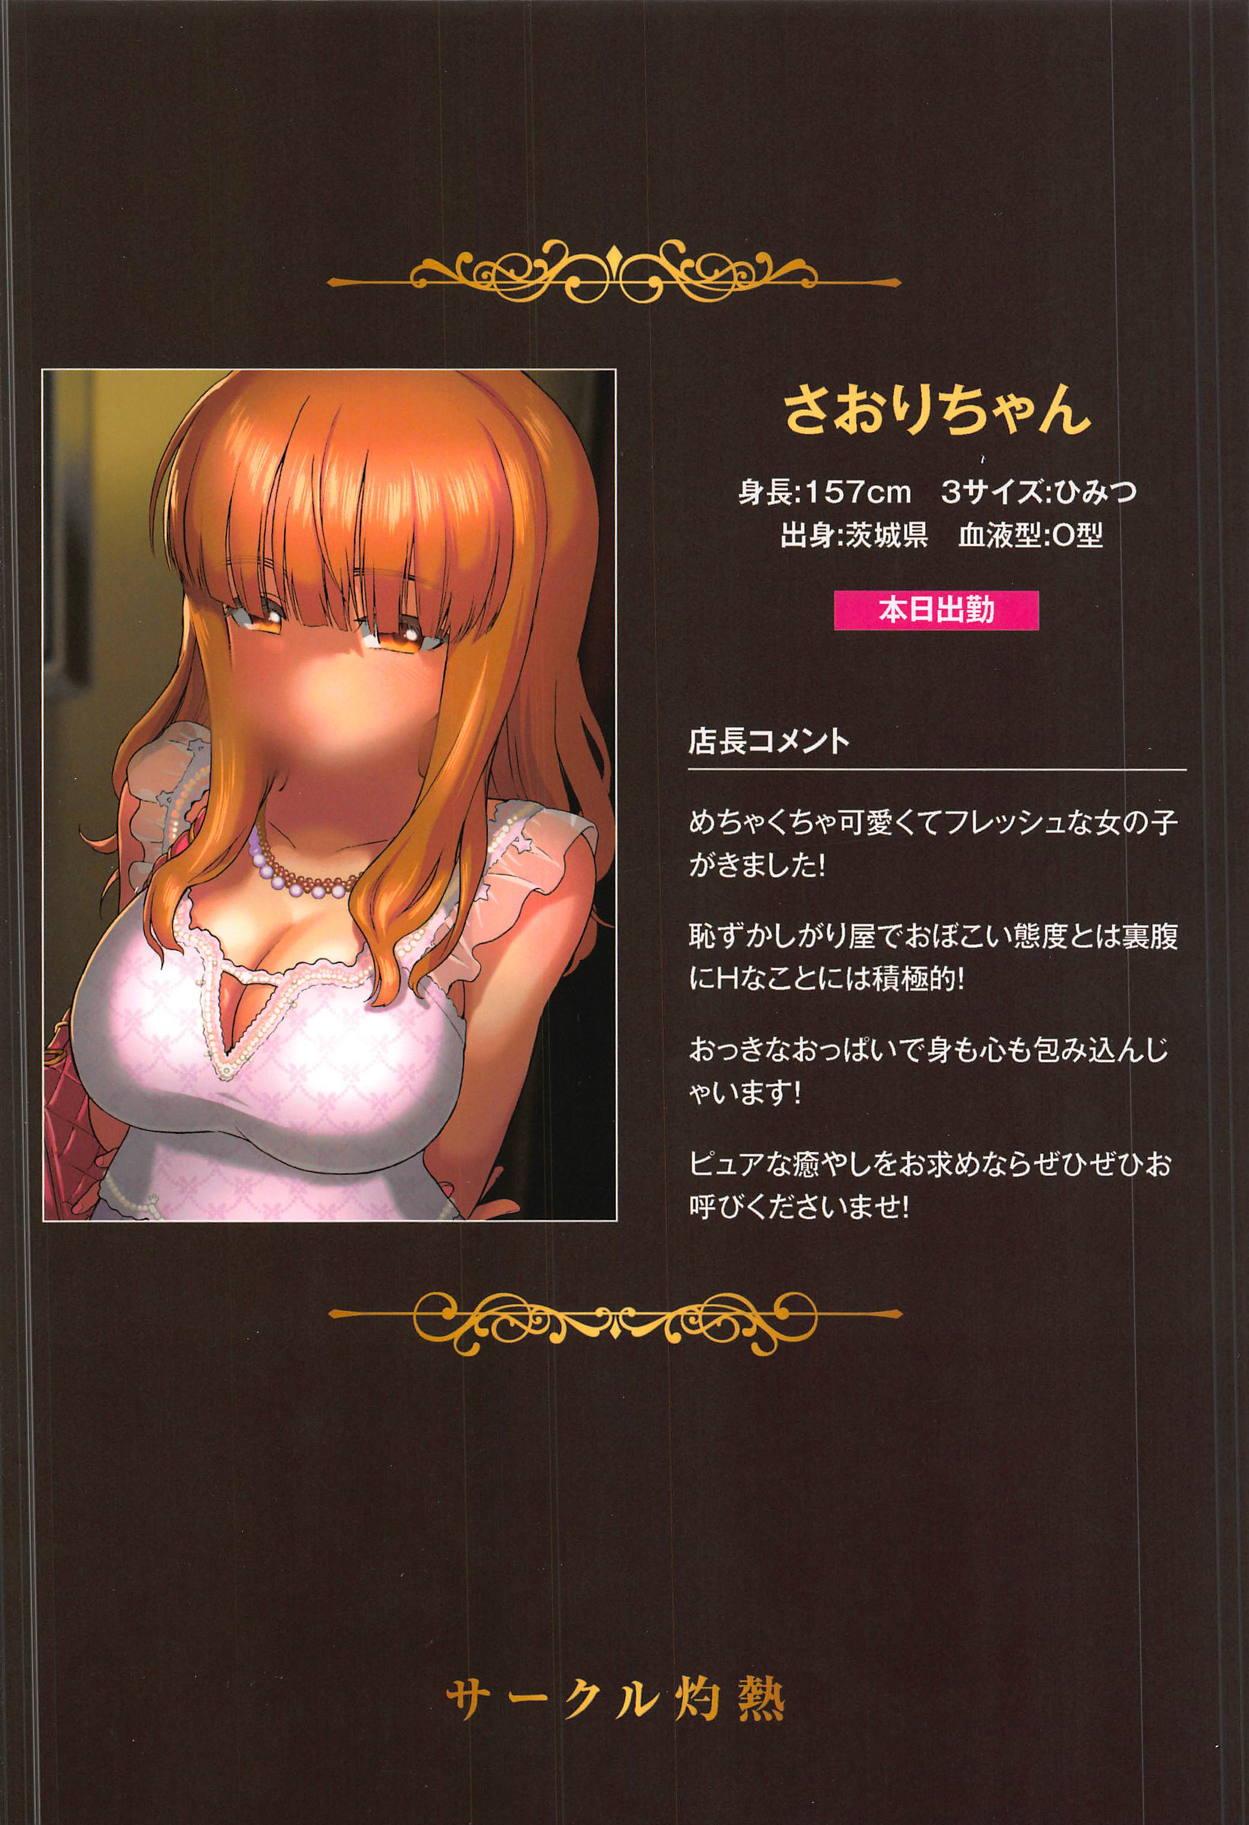 Saori Takebe Thought She Was Going to Lose Her Virginity by Working at a Brothel but it Turned Out to be a Delivery Health Establishment That Does Not Allow Sex 25